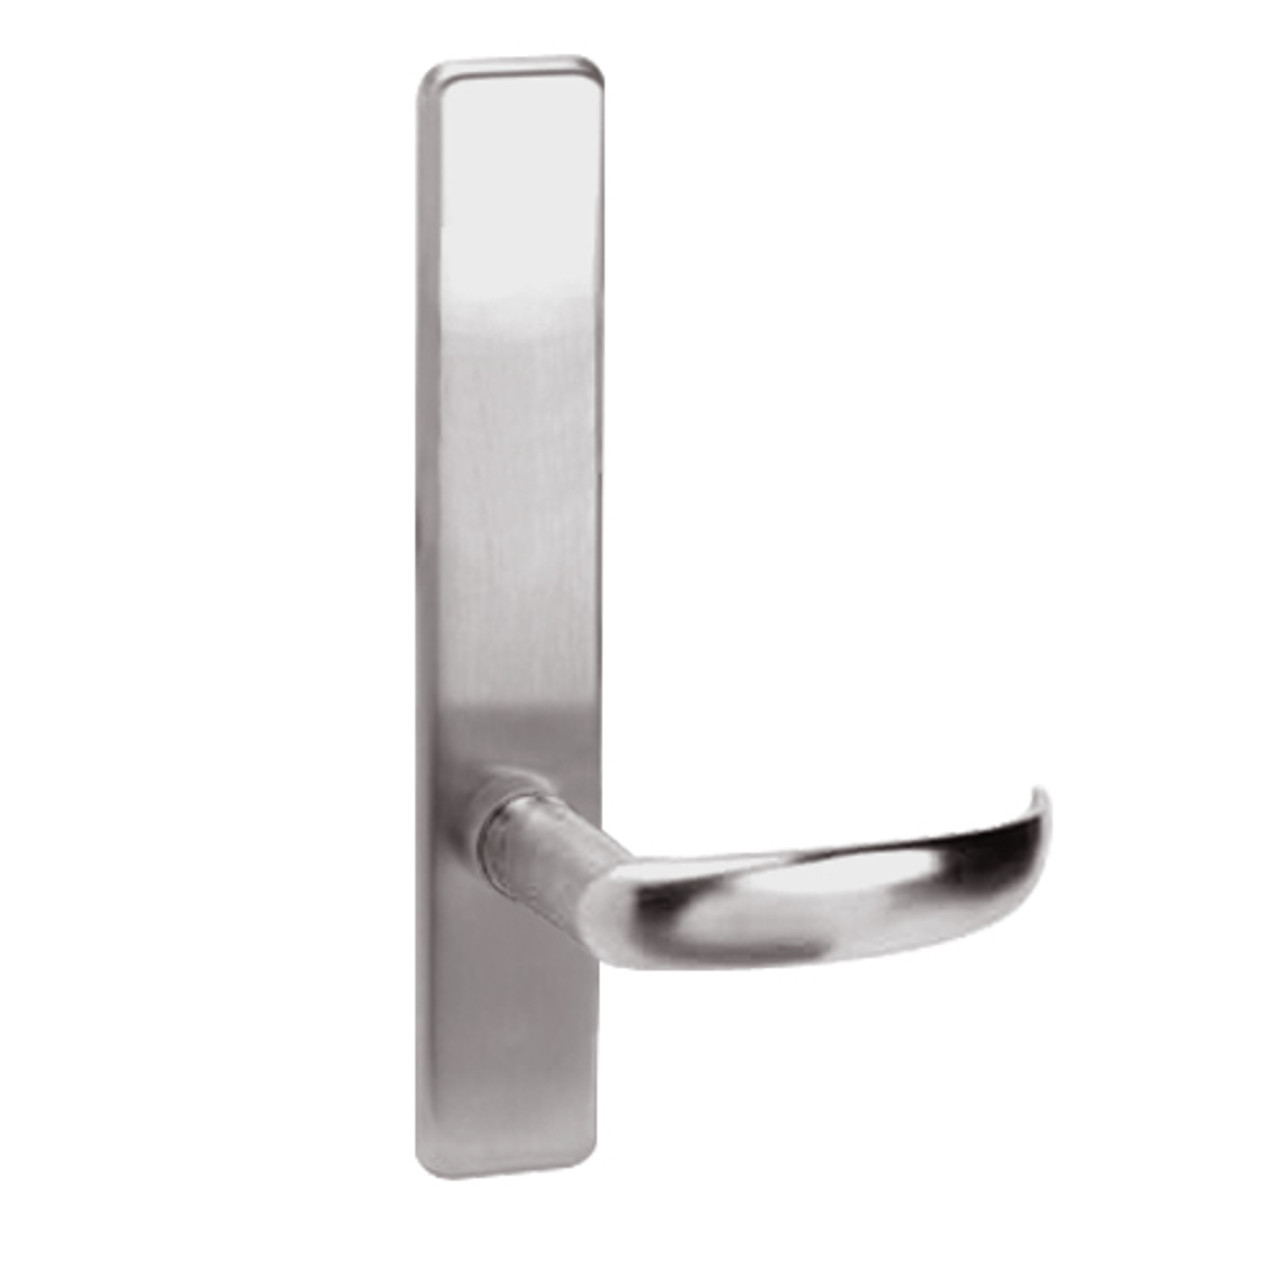 PR810-630-RHR Corbin ED4000 Series Exit Device Trim with Passage Princeton Lever in Satin Stainless Steel Finish